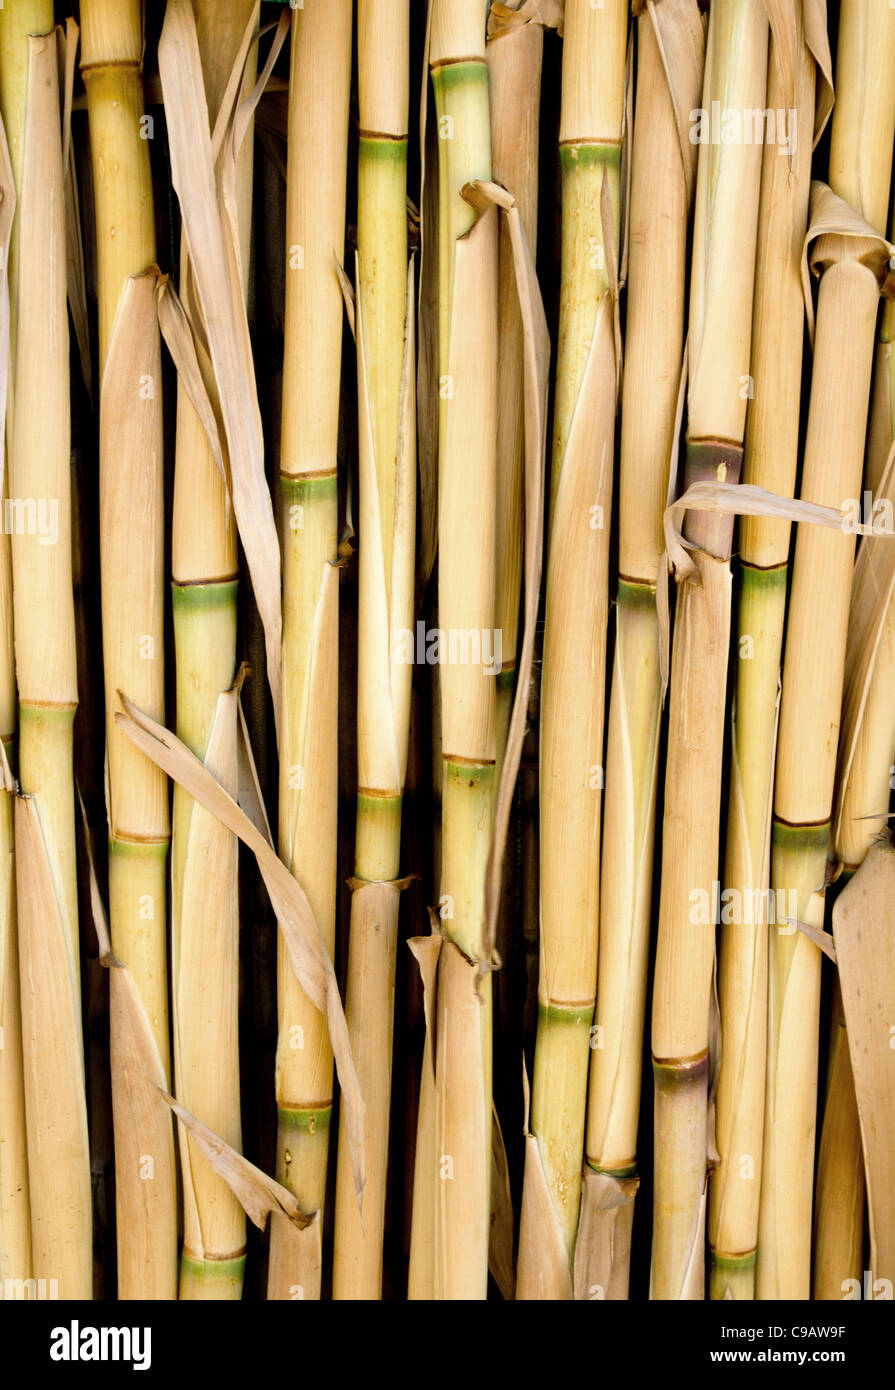 Cane texture used as fence or sunroof in Mediterranean Stock Photo